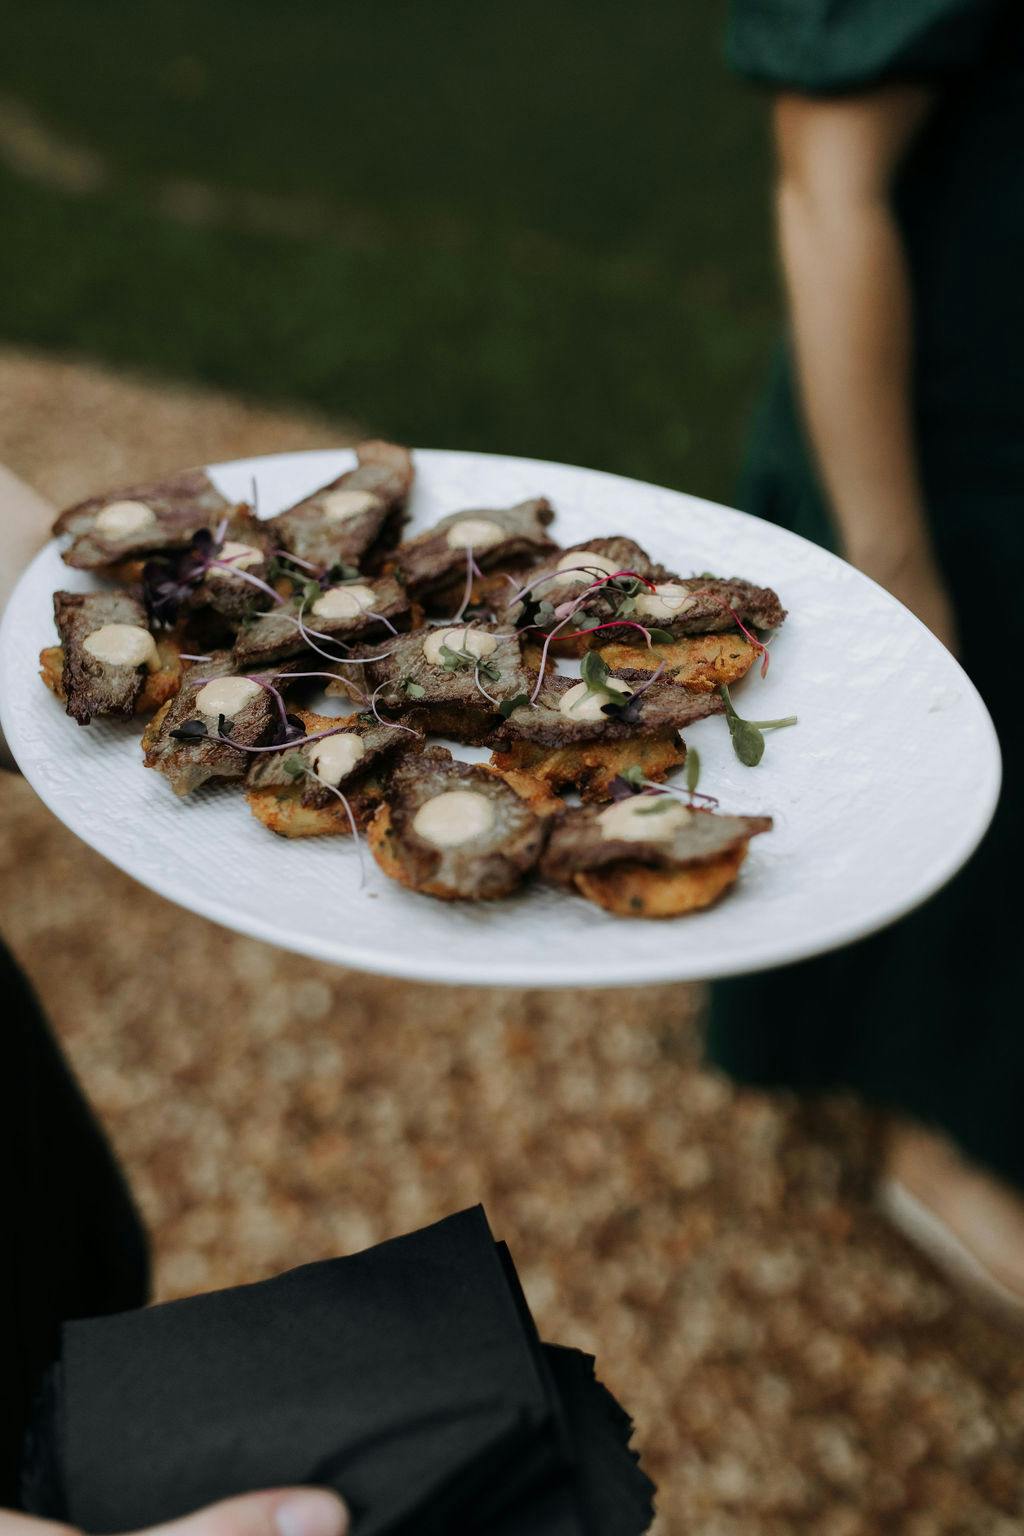 A person is holding a white plate topped with a neatly arranged assortment of appetizer bites. The bites appear to be small slices of toast or crostini, garnished with greens and possibly a creamy topping. The background is slightly out of focus, hinting at an outdoor setting.